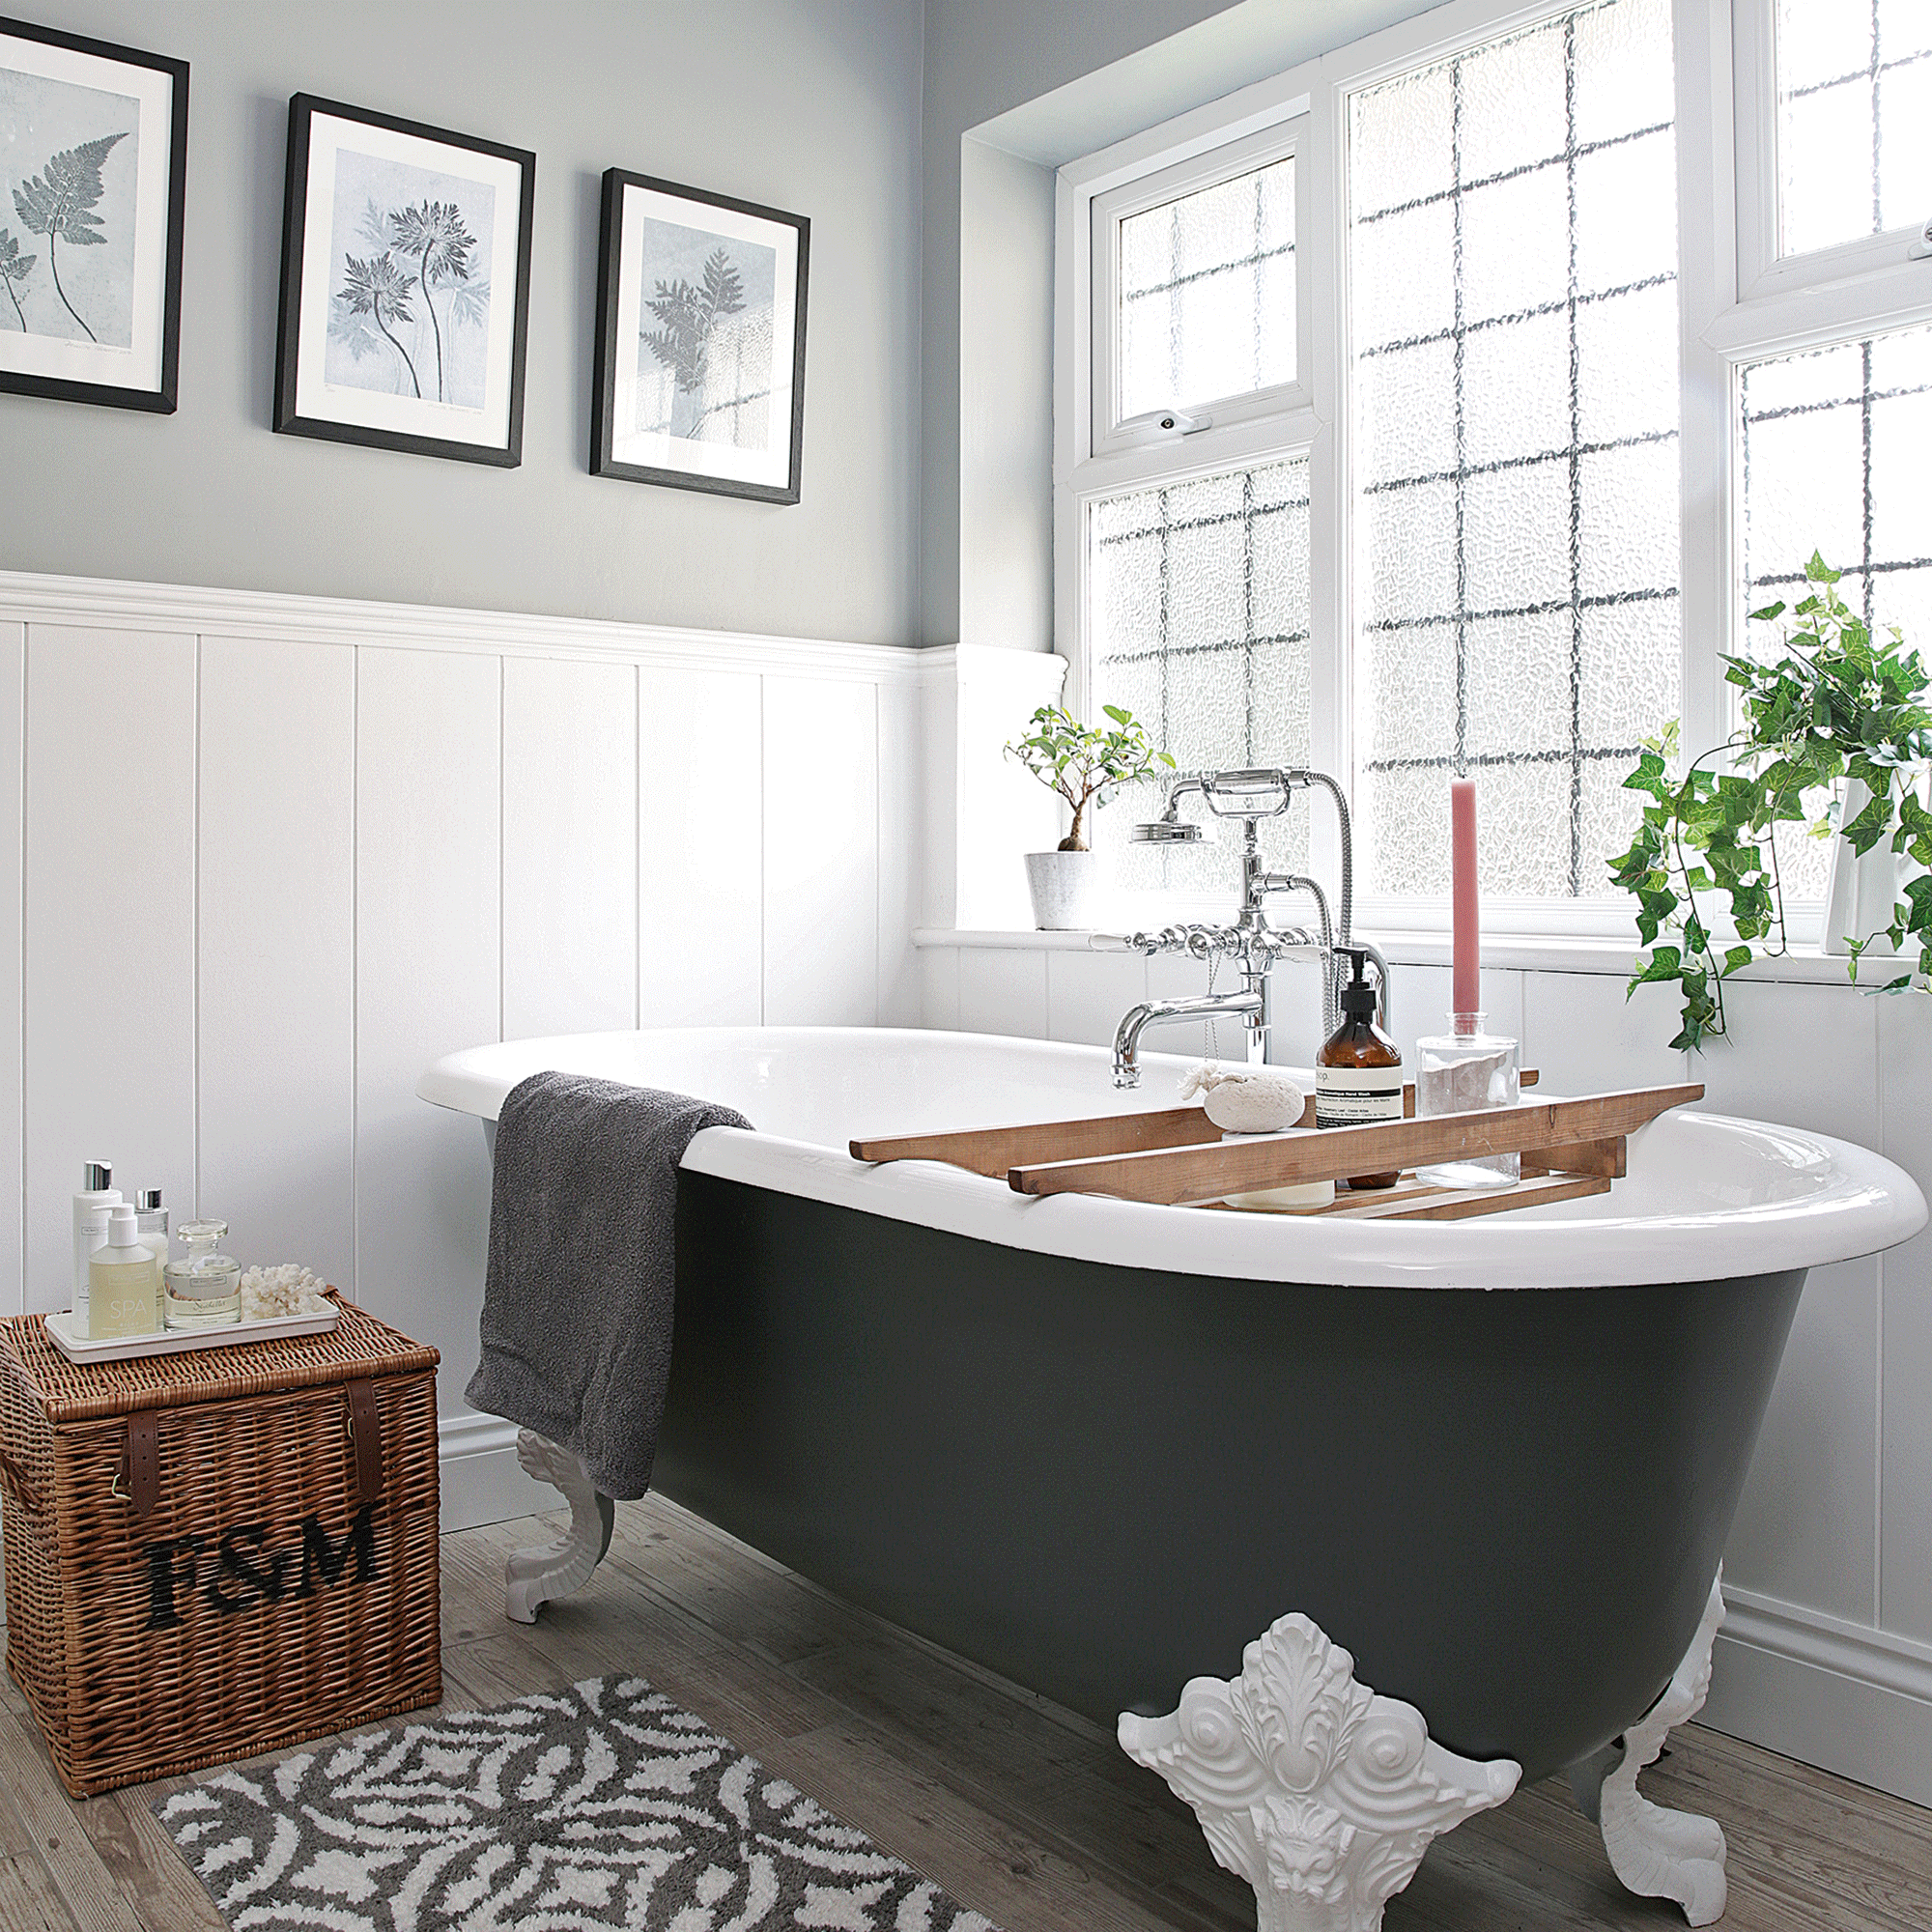 Black bathtub with white tiles and pictures